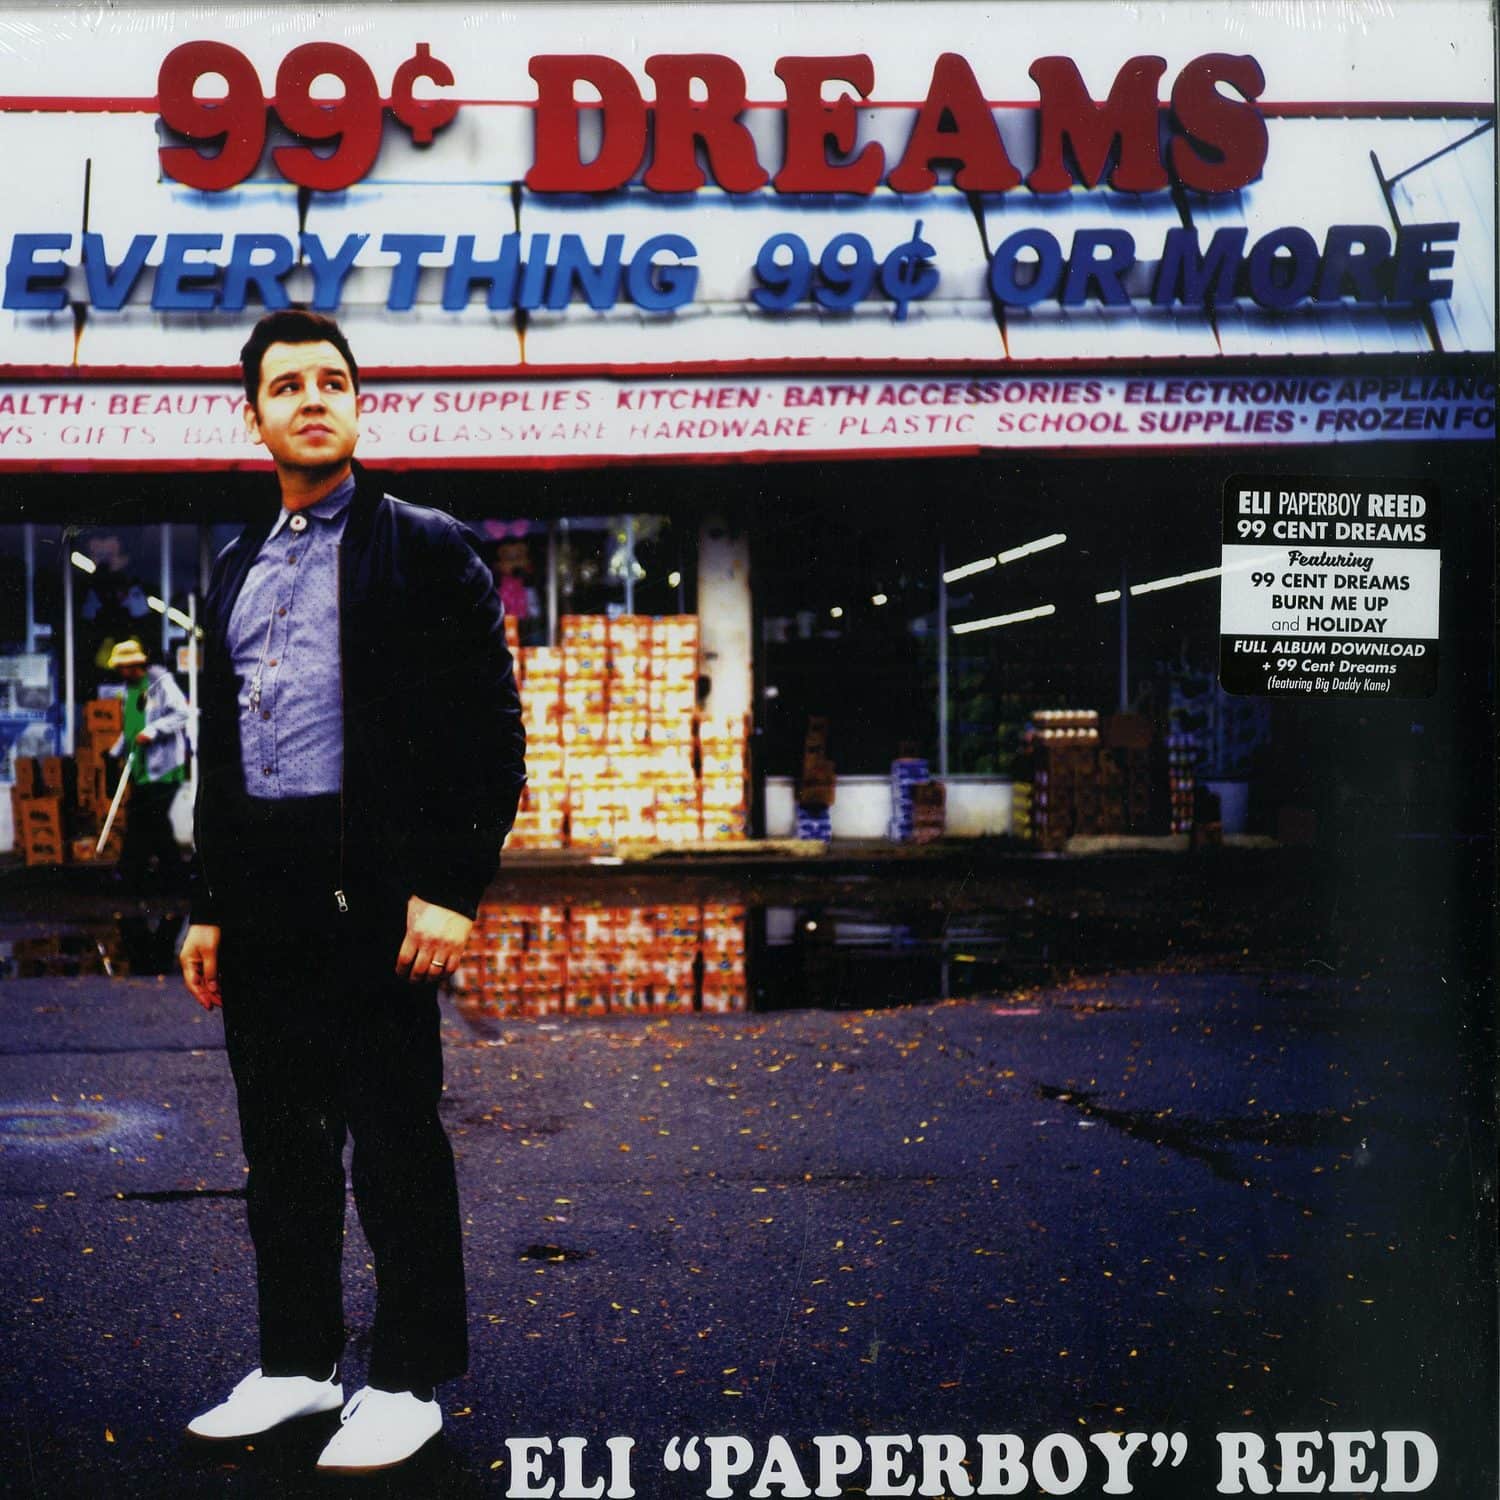 Eli Paperboy Reed - 99 CENT DREAMS 